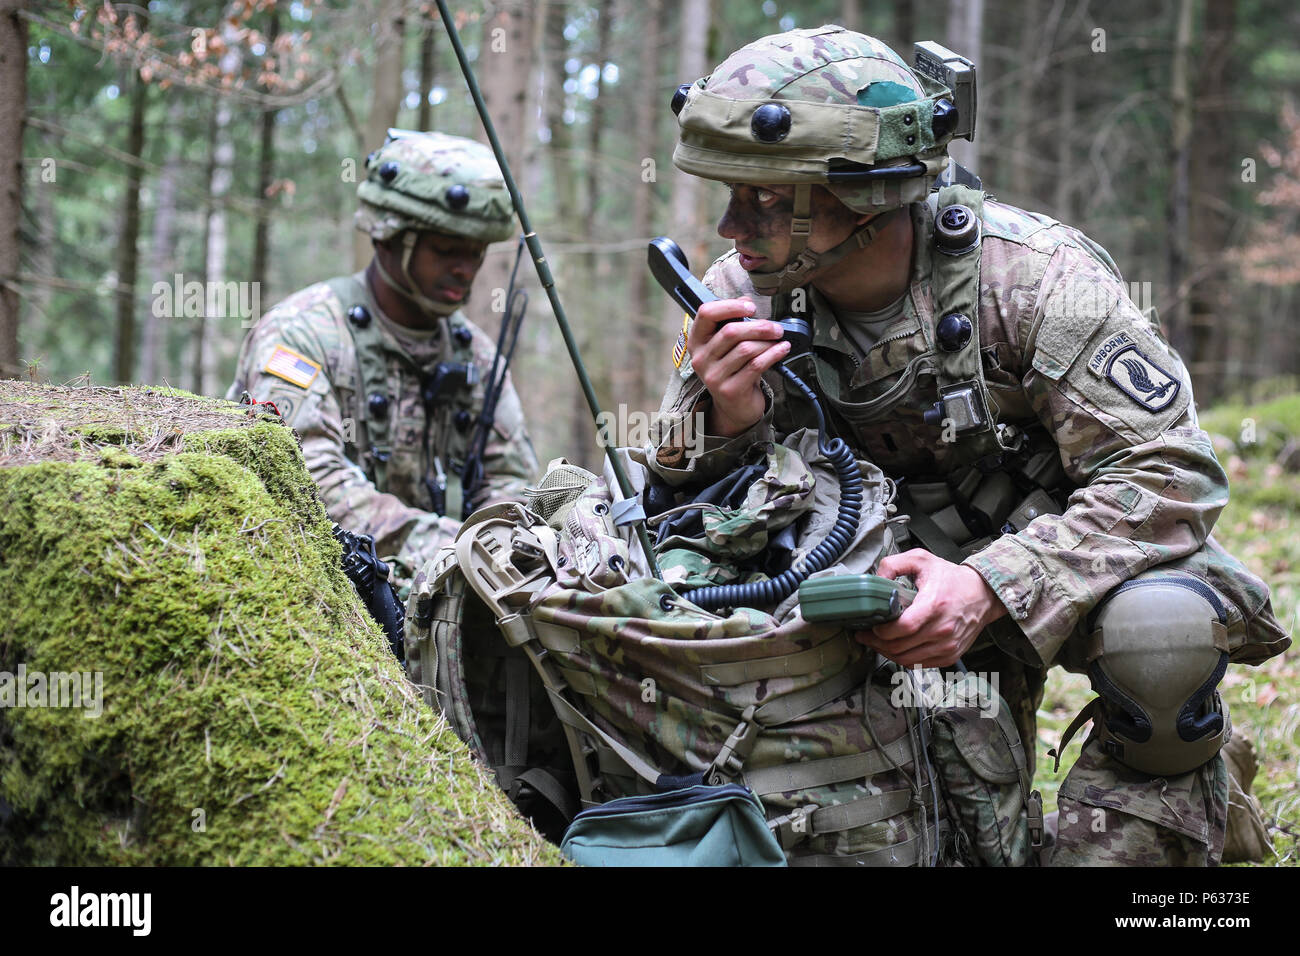 U.S. Army 1st Lt. Vincent Marcantonio, right, and Staff Sgt. Justin Johnson of Headquarters and Headquarters Battalion, 173rd Airborne Brigade conducts movement to contact scenario during exercise Saber Junction 16 at the U.S. Army’s Joint Multinational Readiness Center (JMRC) in Hohenfels, Germany, April 13, 2016. Saber Junction 16 is the U.S. Army Europe’s 173rd Airborne Brigade’s combat training center certification exercise, taking place at the JMRC in Hohenfels, Germany, Mar. 31-Apr. 24, 2016.  The exercise is designed to evaluate the readiness of the Army’s Europe-based combat brigades t Stock Photo